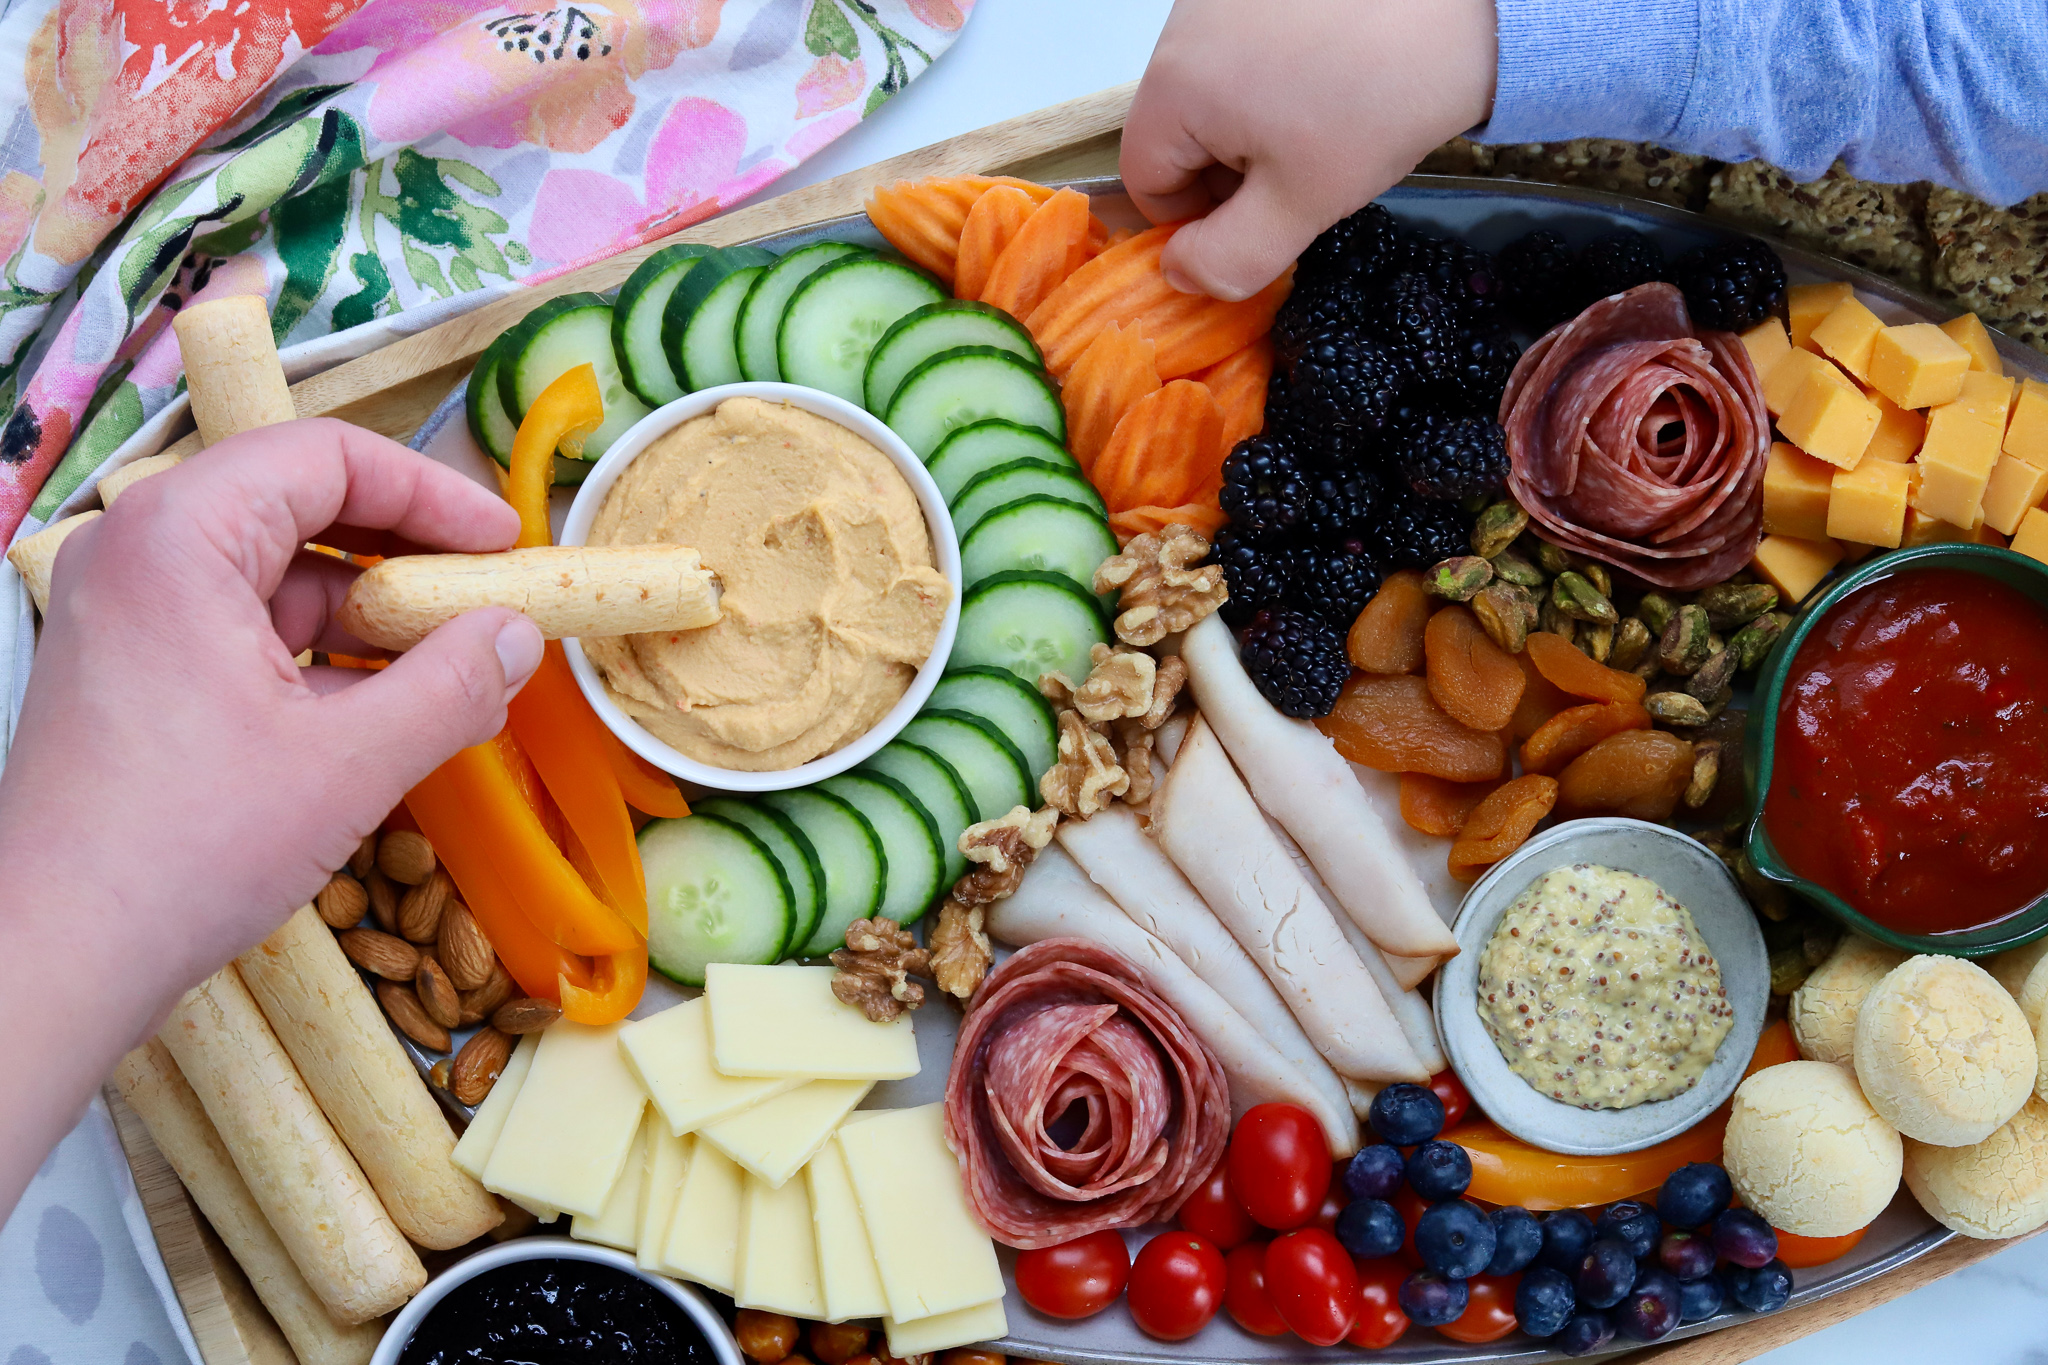 How To Make A Family-Friendly Charcuterie Board